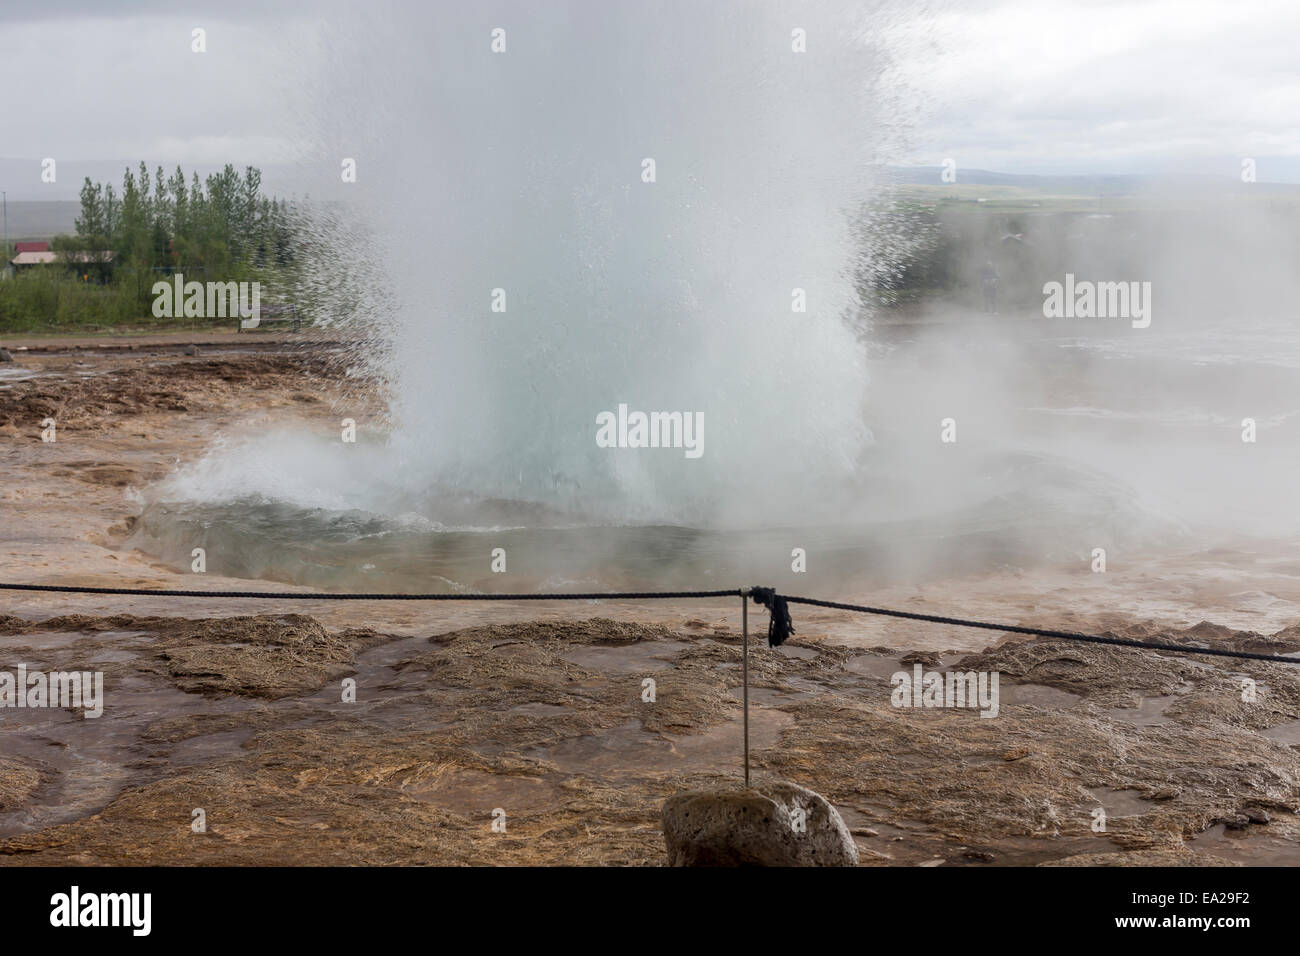 Strokkur Icelandic for 'The Churn' is a geyser in the geothermic region beside the Hvítá River in Iceland Stock Photo